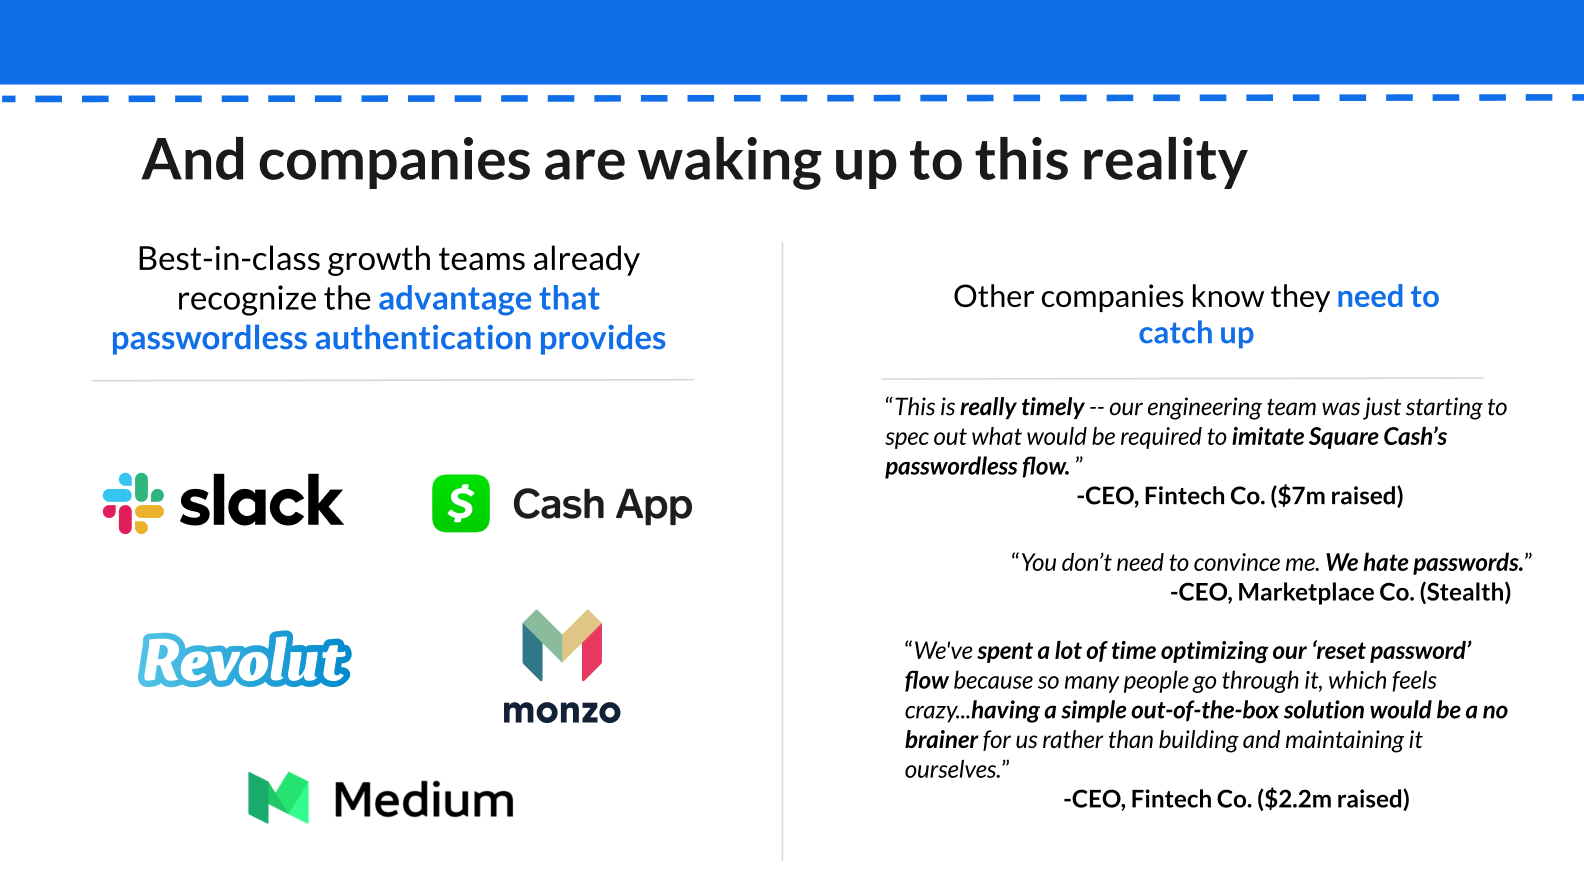 Blue & white power point slide entitled "And companies are waking up to this reality," with the following supporting bullets:
- Best-in-class growth teams already recognize the advantage that passwordless authentication provides
- Other companies know they need to catch up